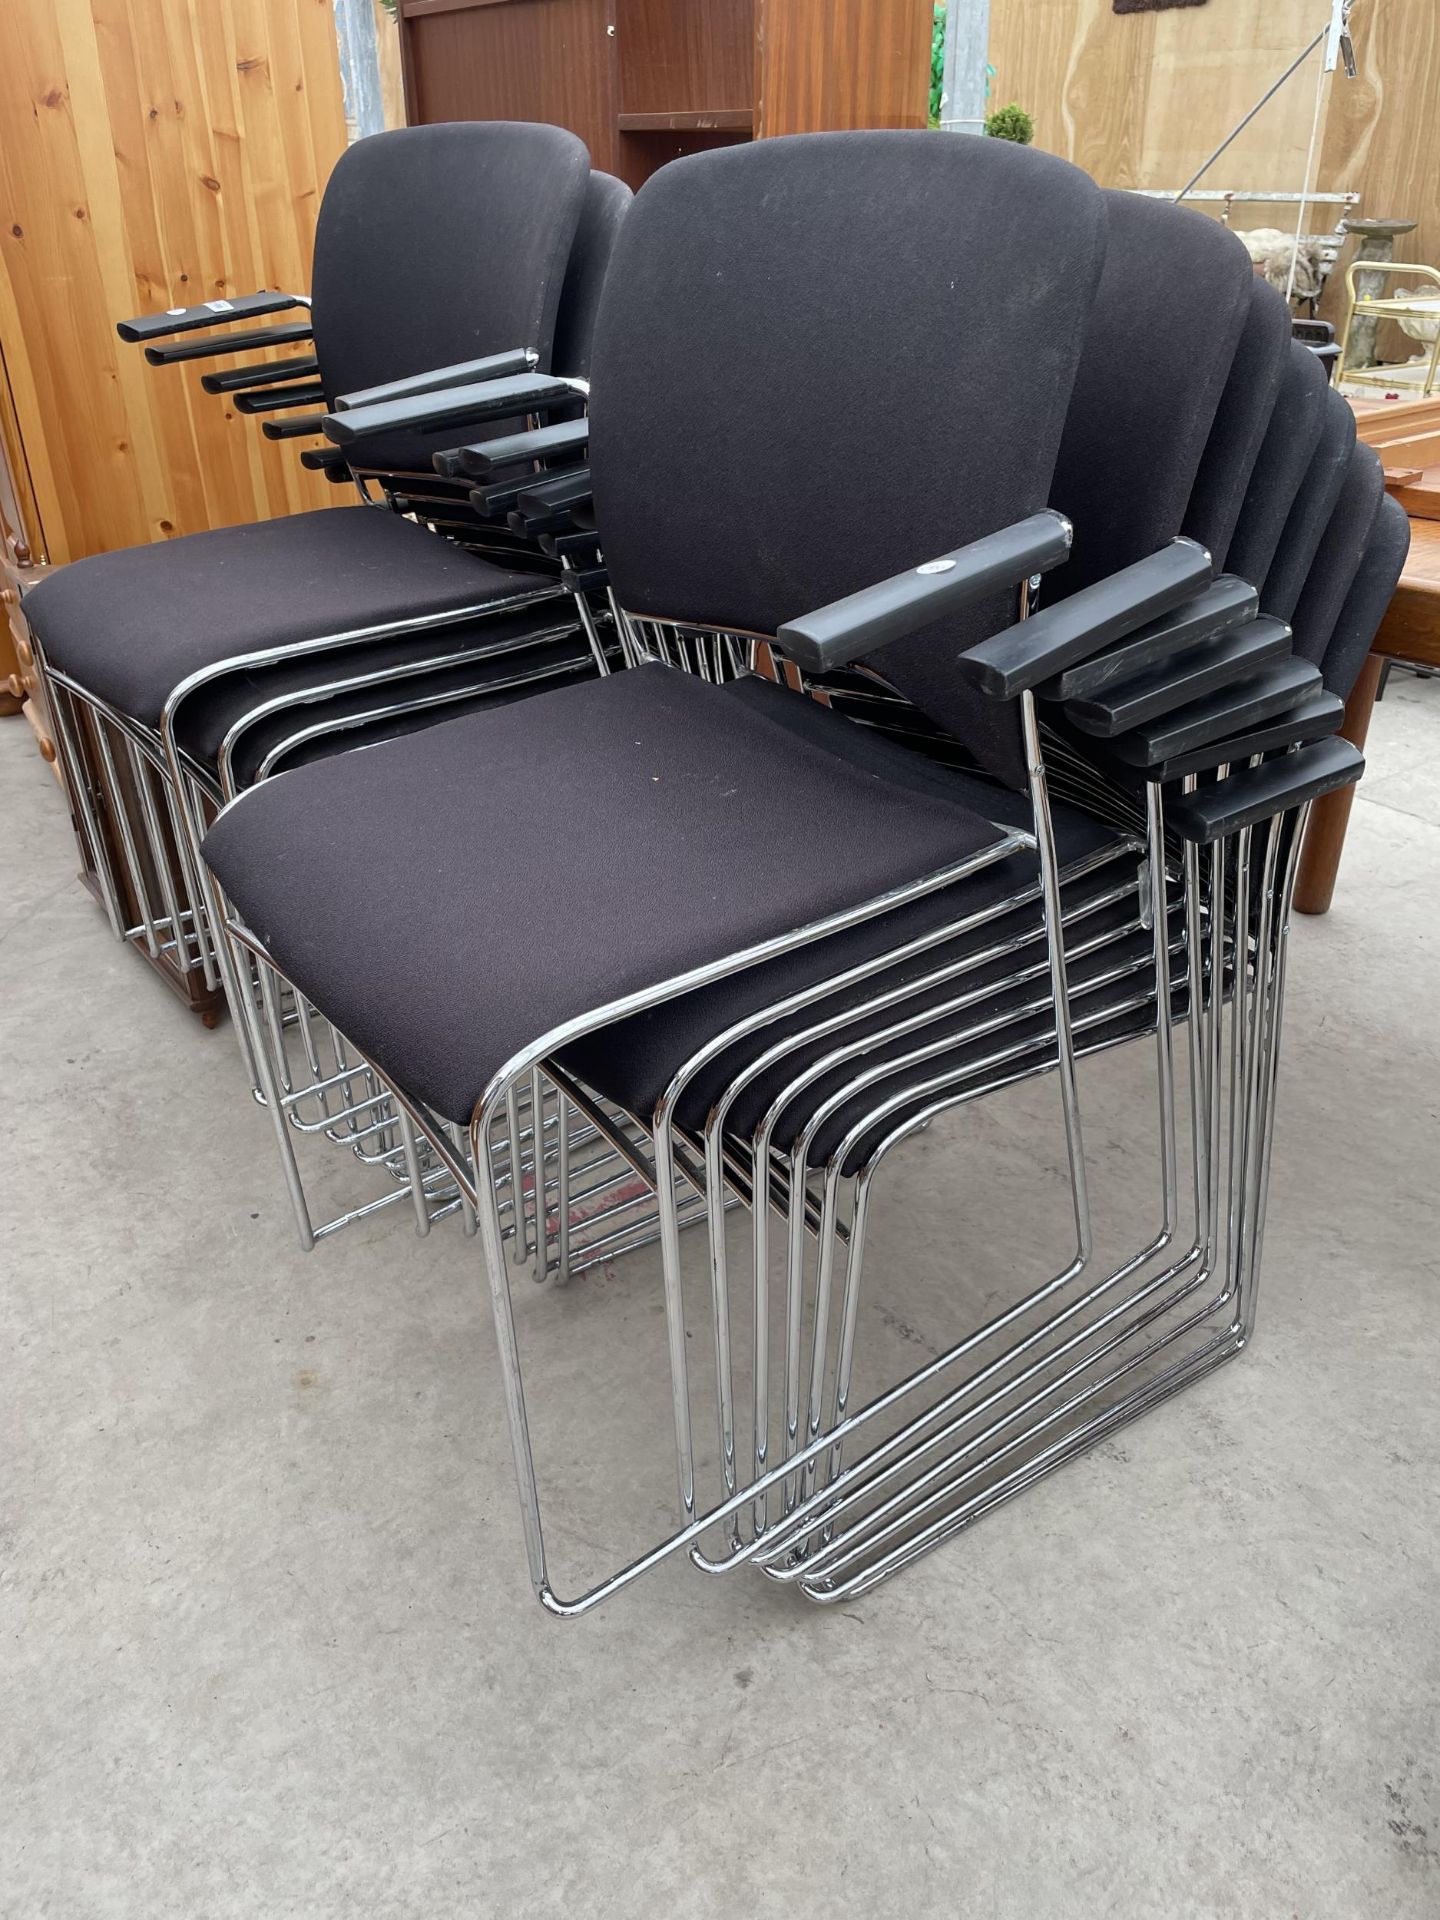 FIFTEEN MODERN STACKING CHAIRS - Image 2 of 2